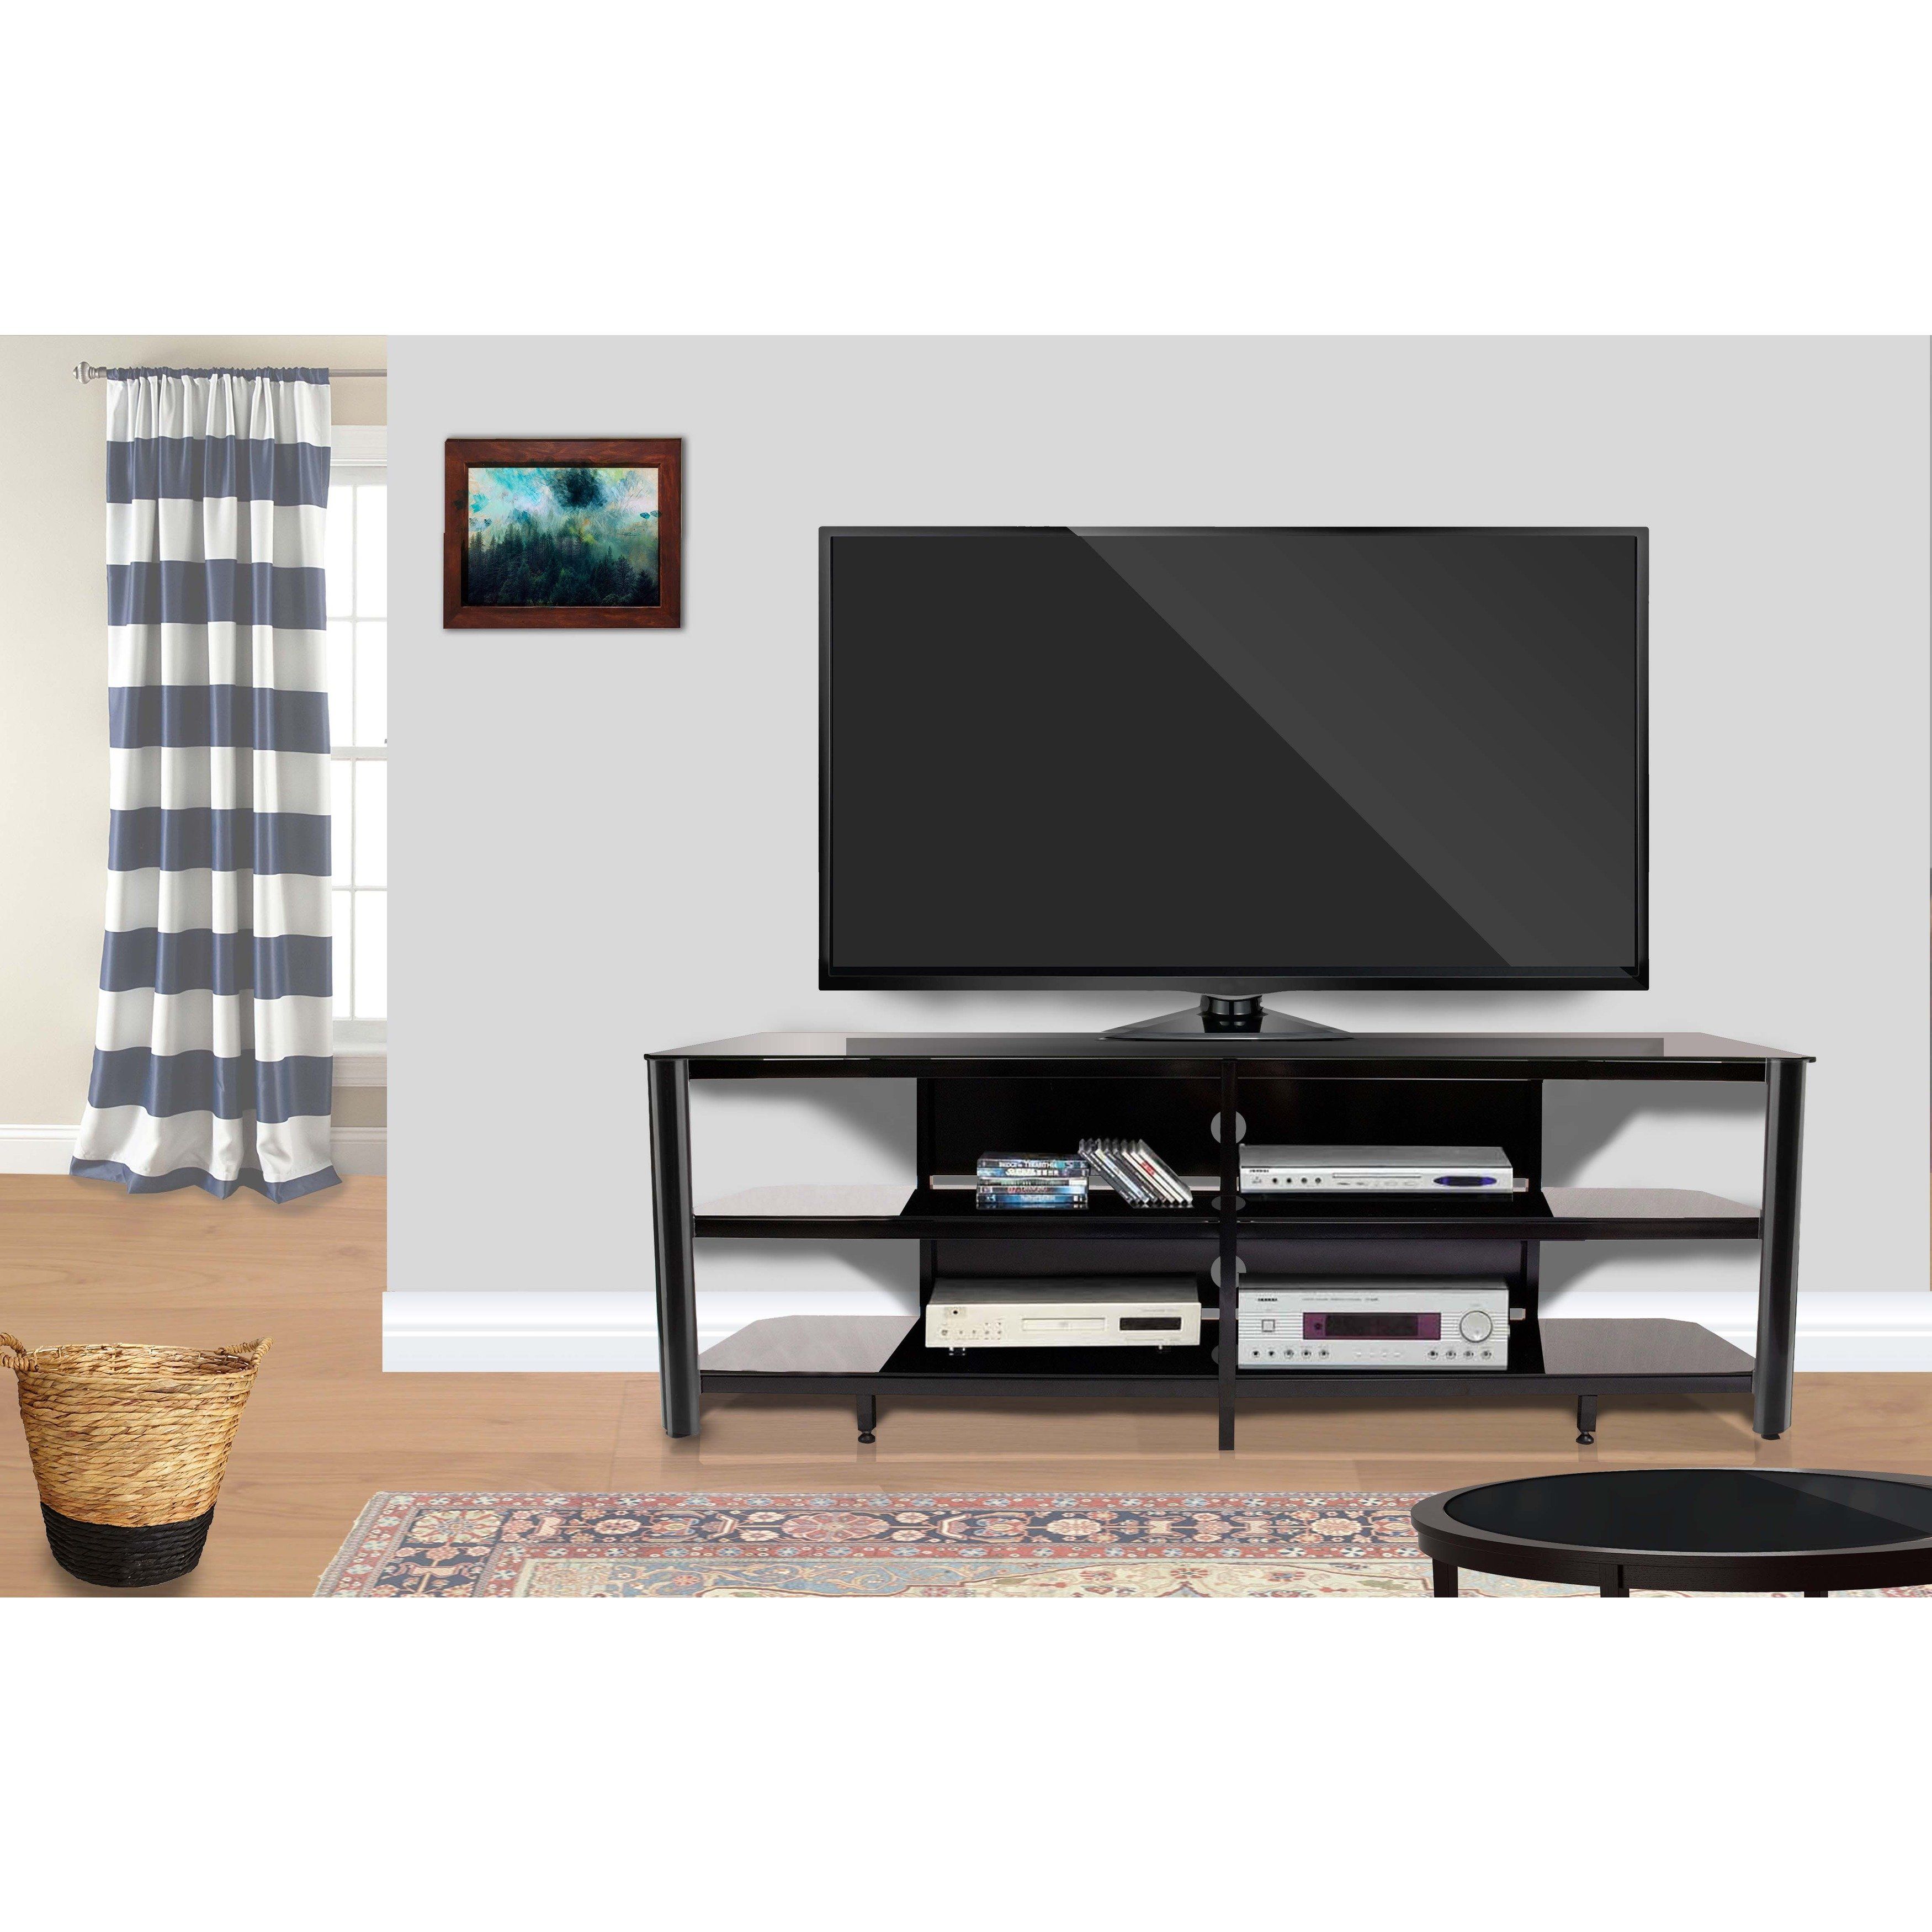 Shop Fold 'n' Snap Oxford 73 Inch Black Innovex Tv Stand – Ships To With Regard To Oxford 60 Inch Tv Stands (Photo 5 of 30)